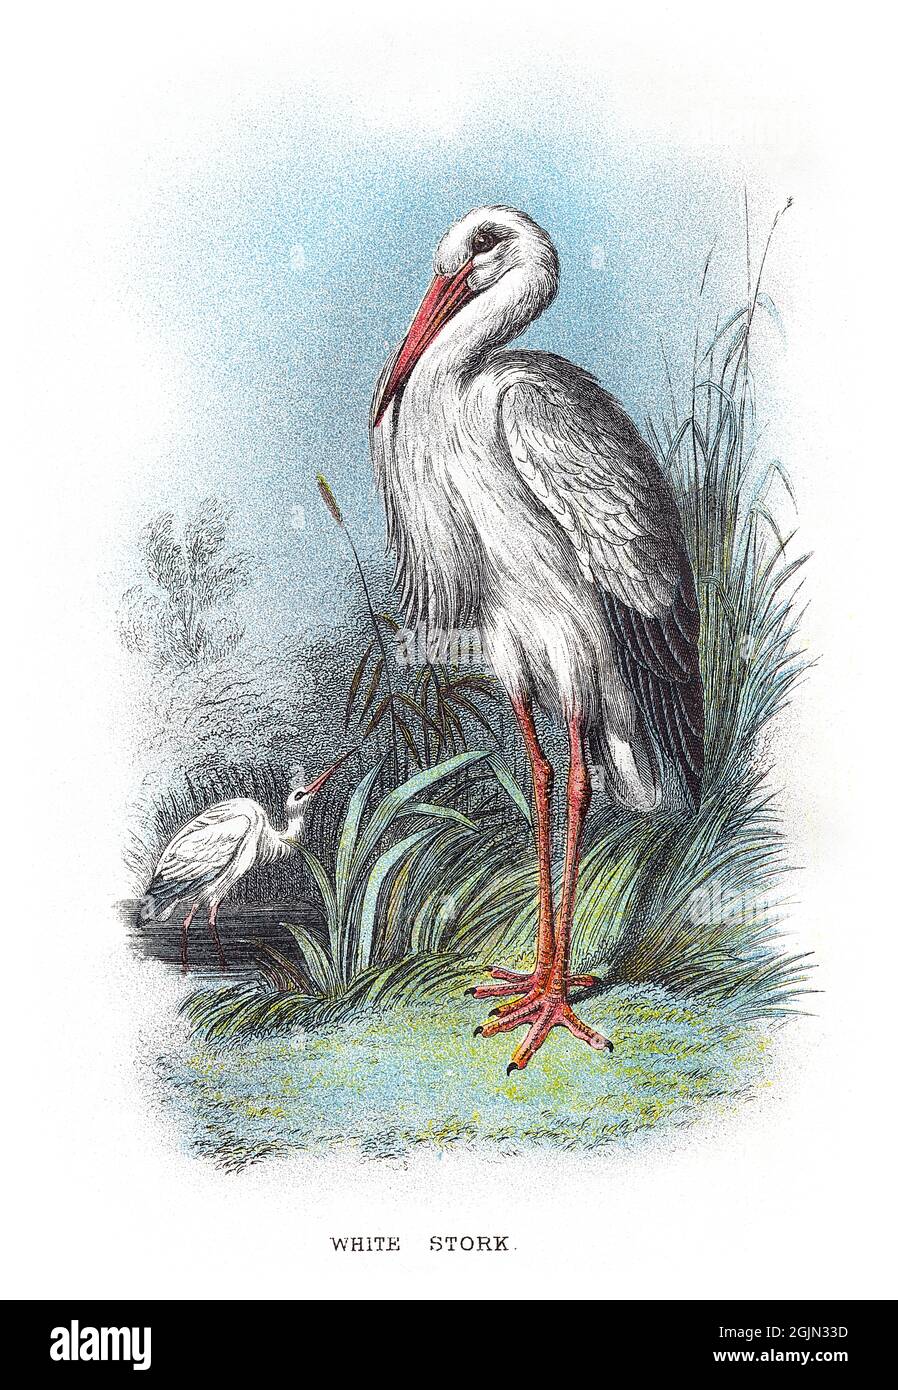 The white stork, Ciconia ciconia, is a large bird in the stork family, Ciconiidae. Stock Photo